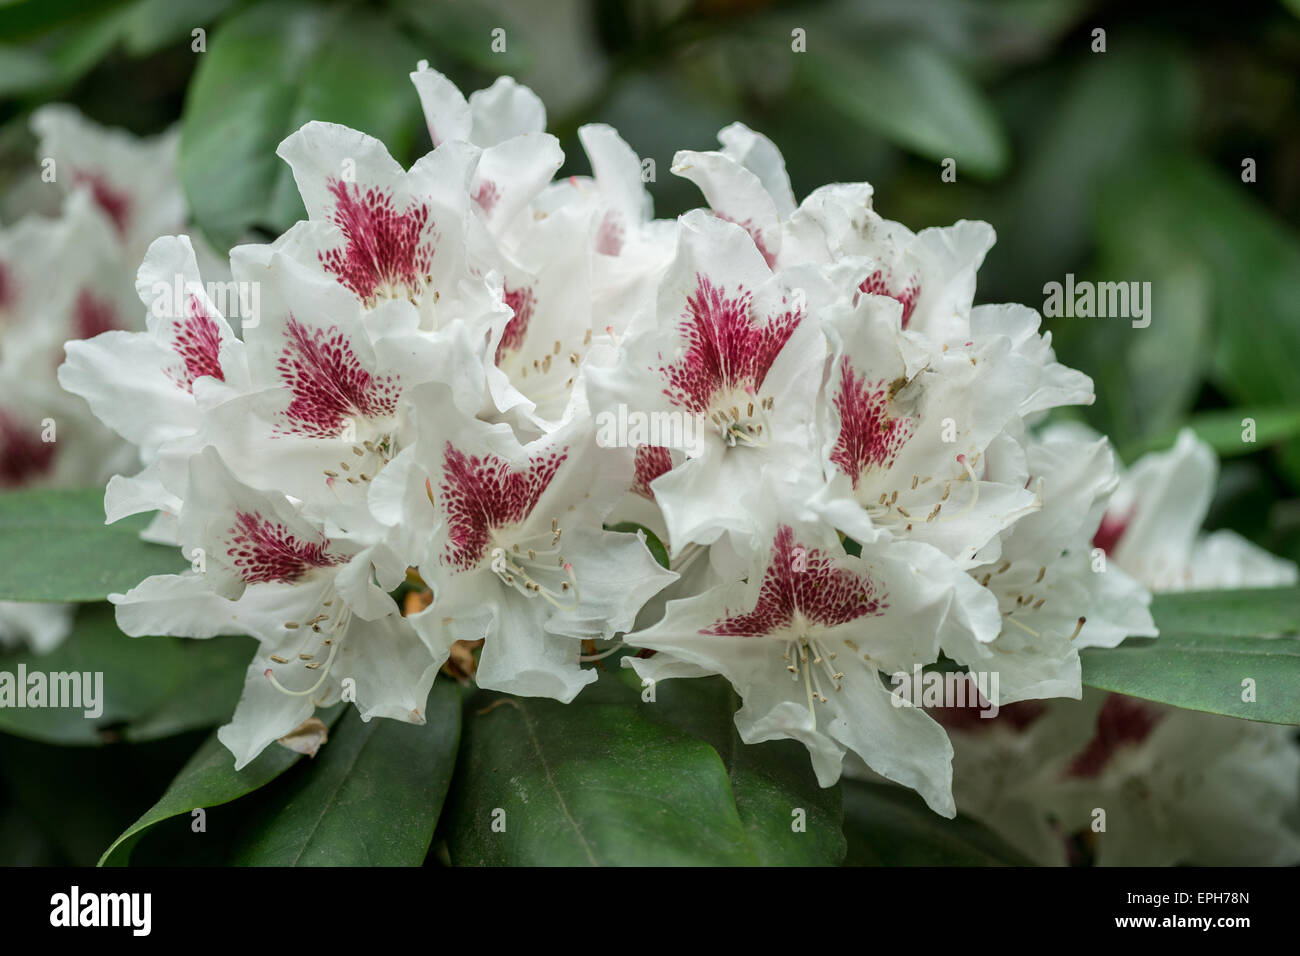 Rhododendron Textor white dark pink  flowers Stock Photo